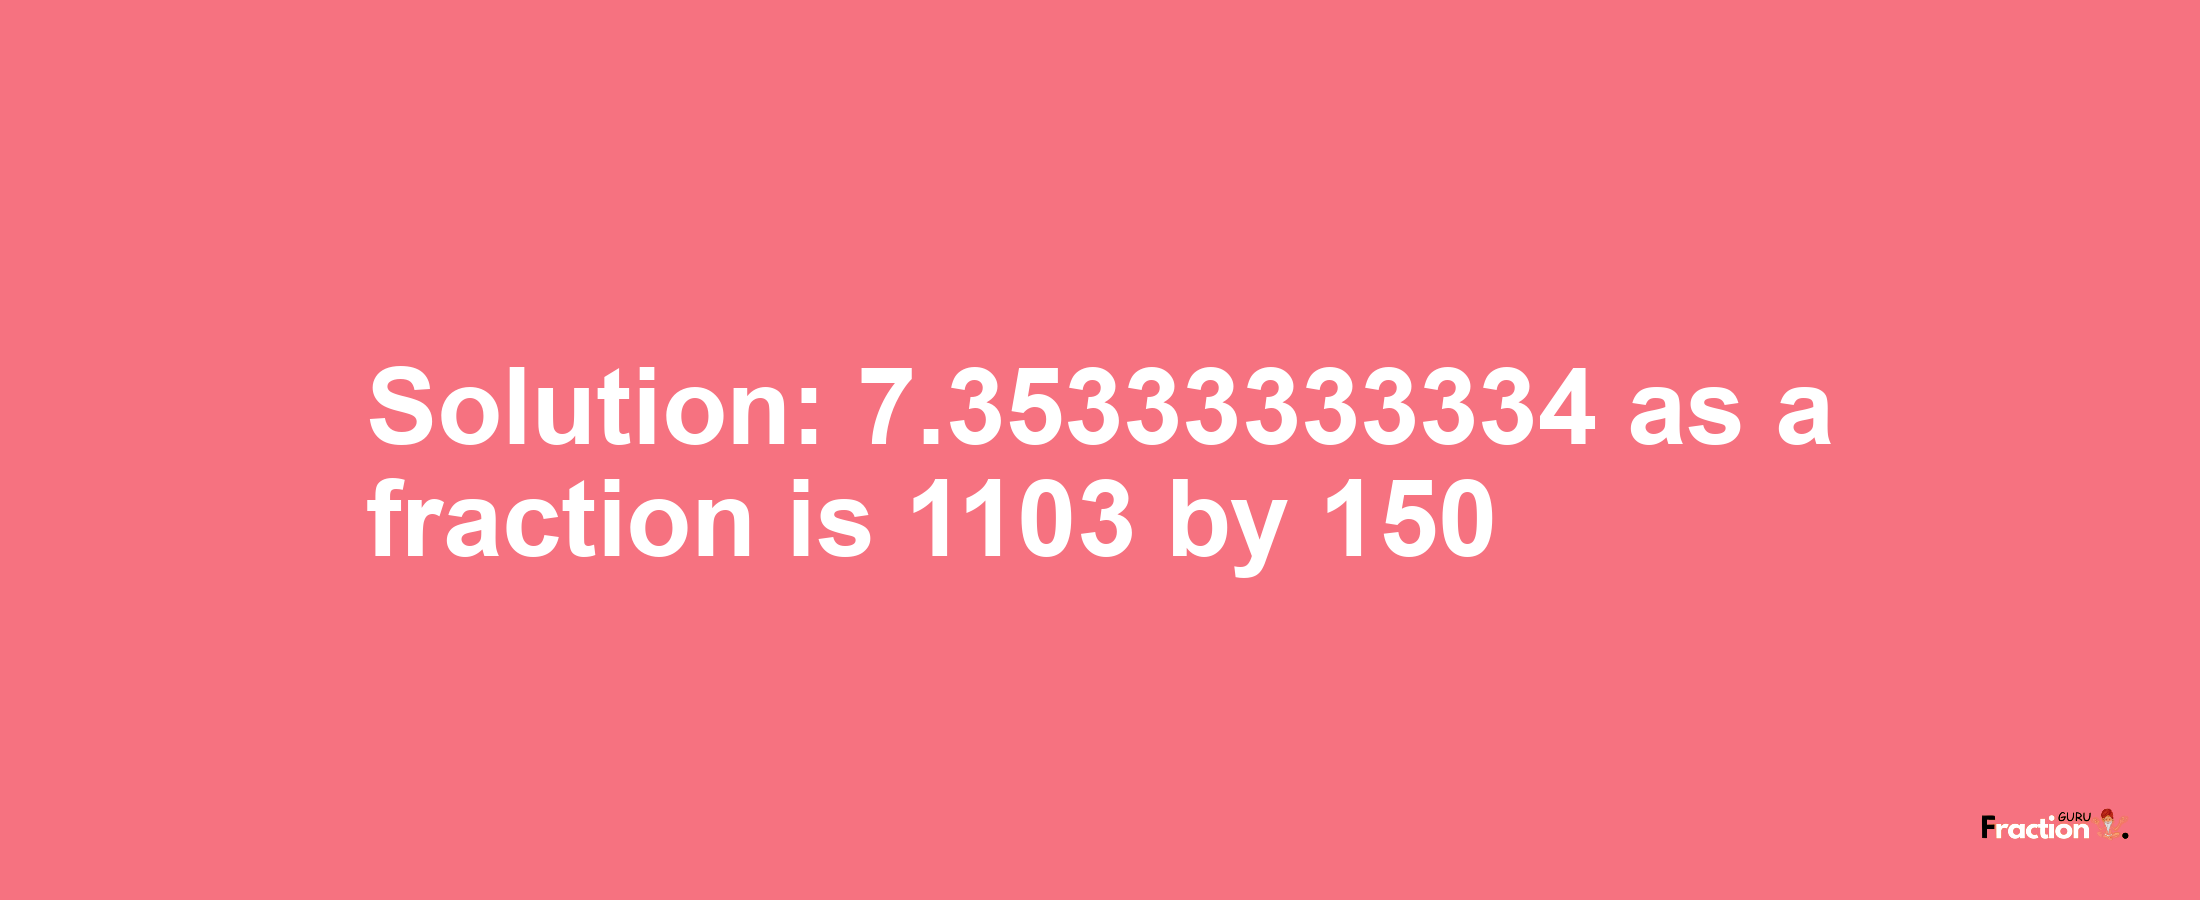 Solution:7.35333333334 as a fraction is 1103/150